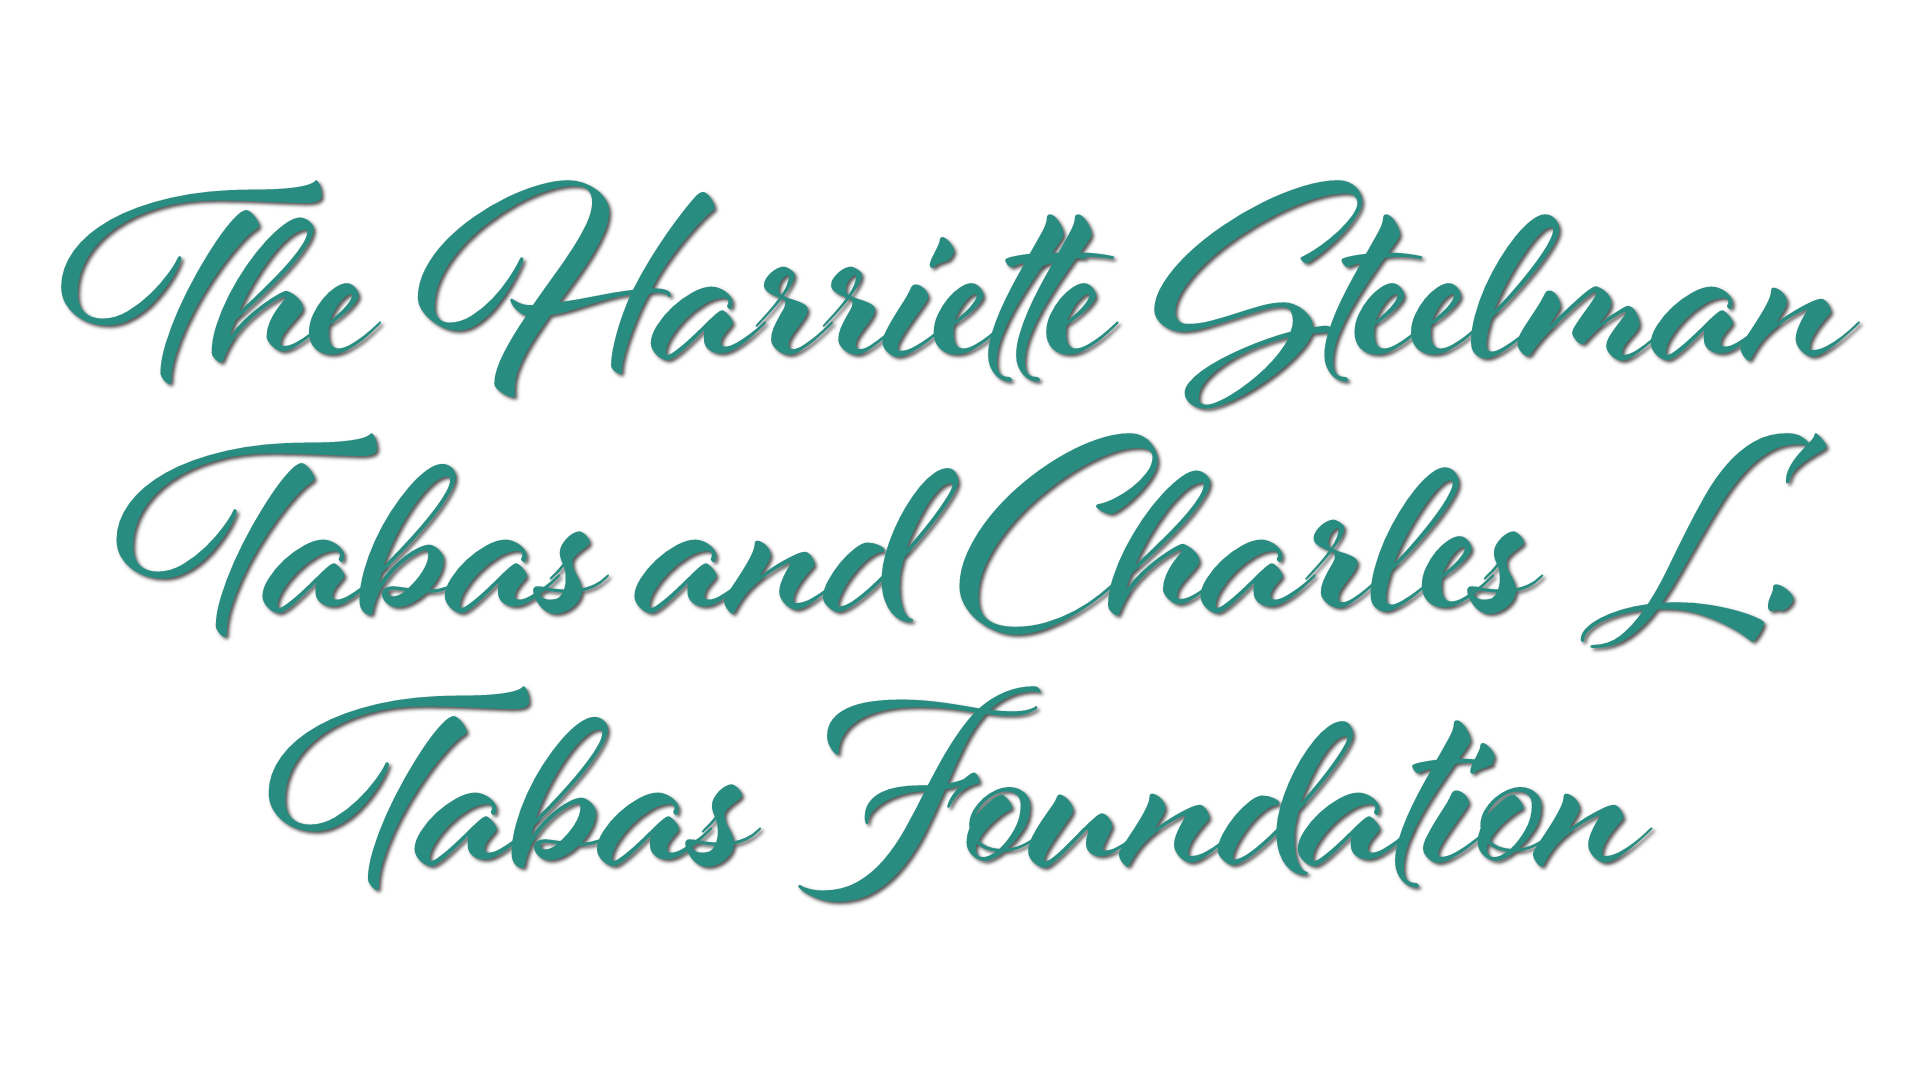 Protector of Innocence - The Harriette Steelman Tabas and Charles L. Tabas Foundation